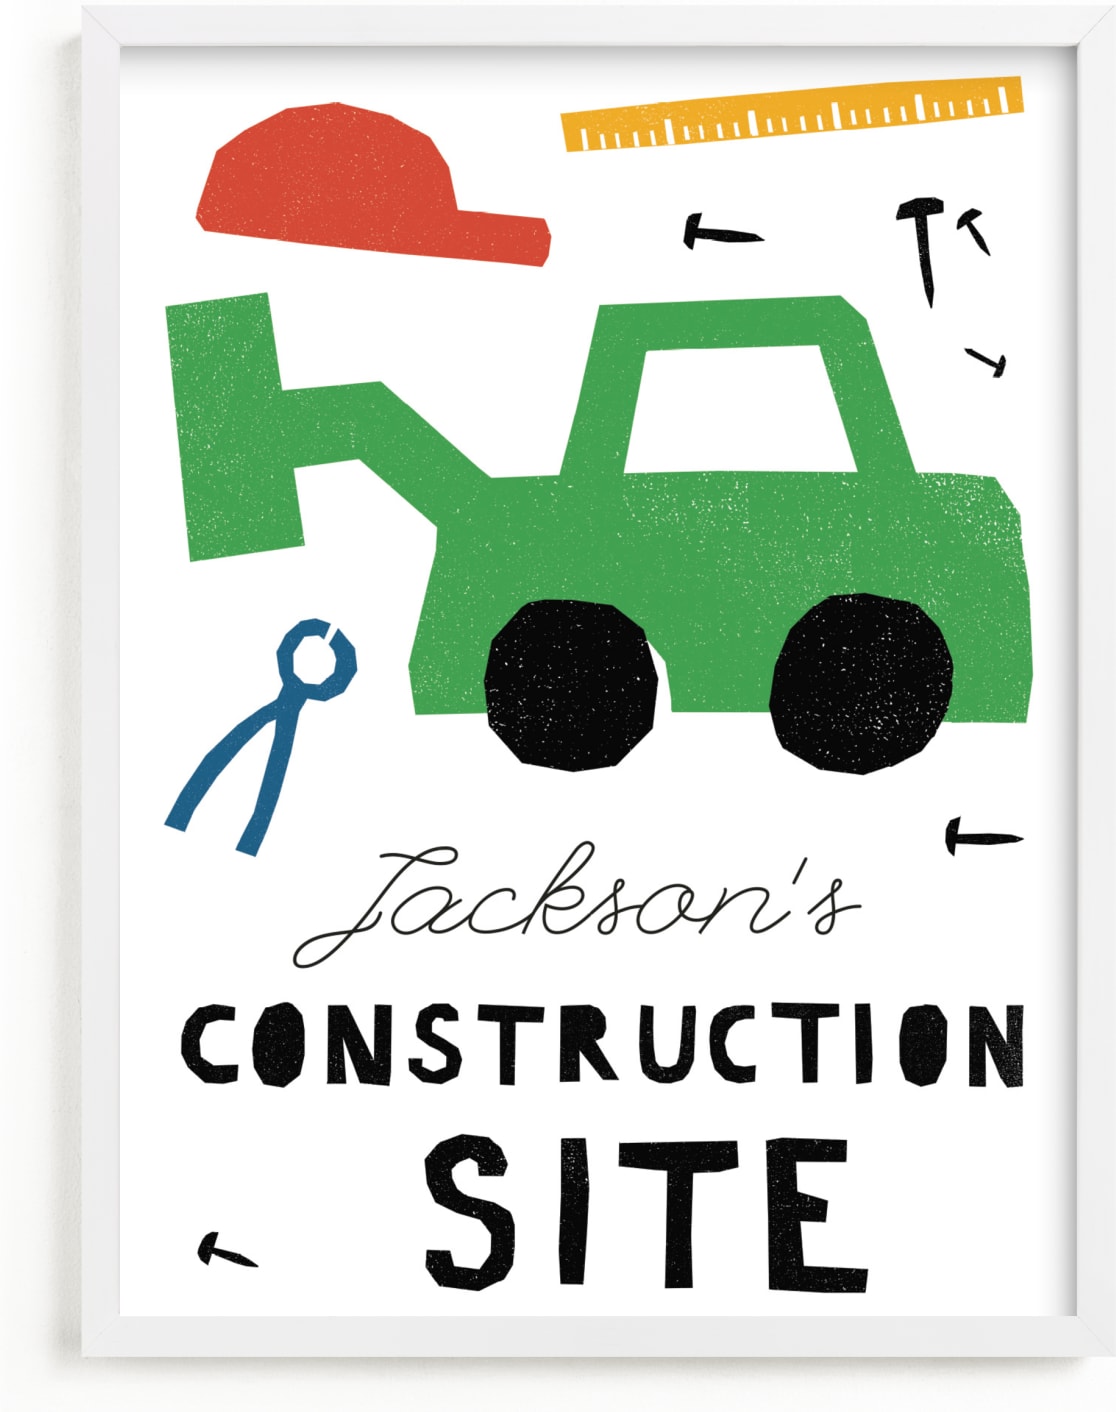 This is a colorful personalized art for kid by Sumak Studio called construction site.